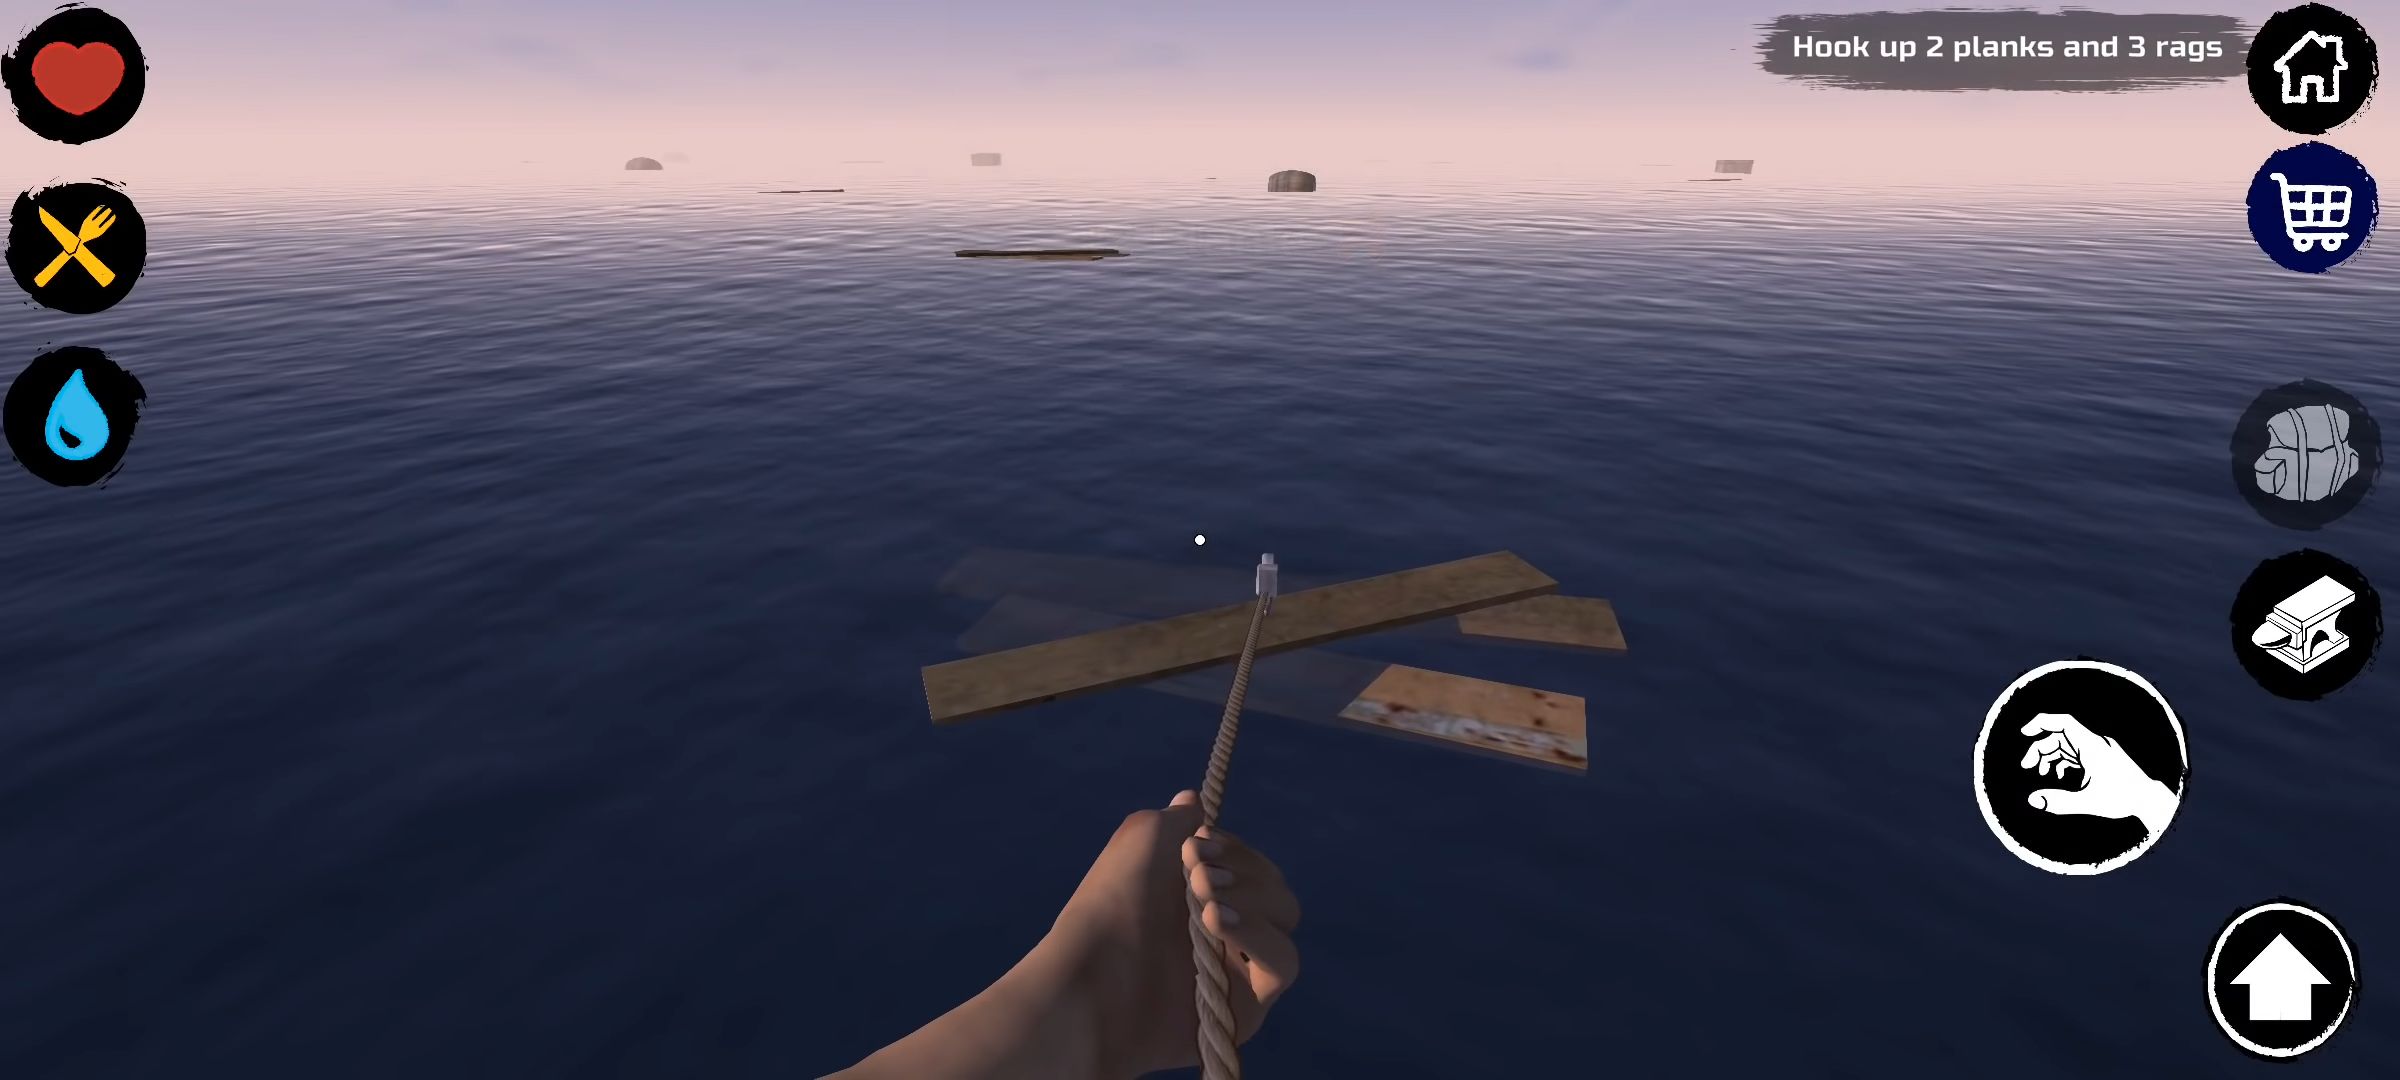 Survival and Craft: Crafting In The Ocean